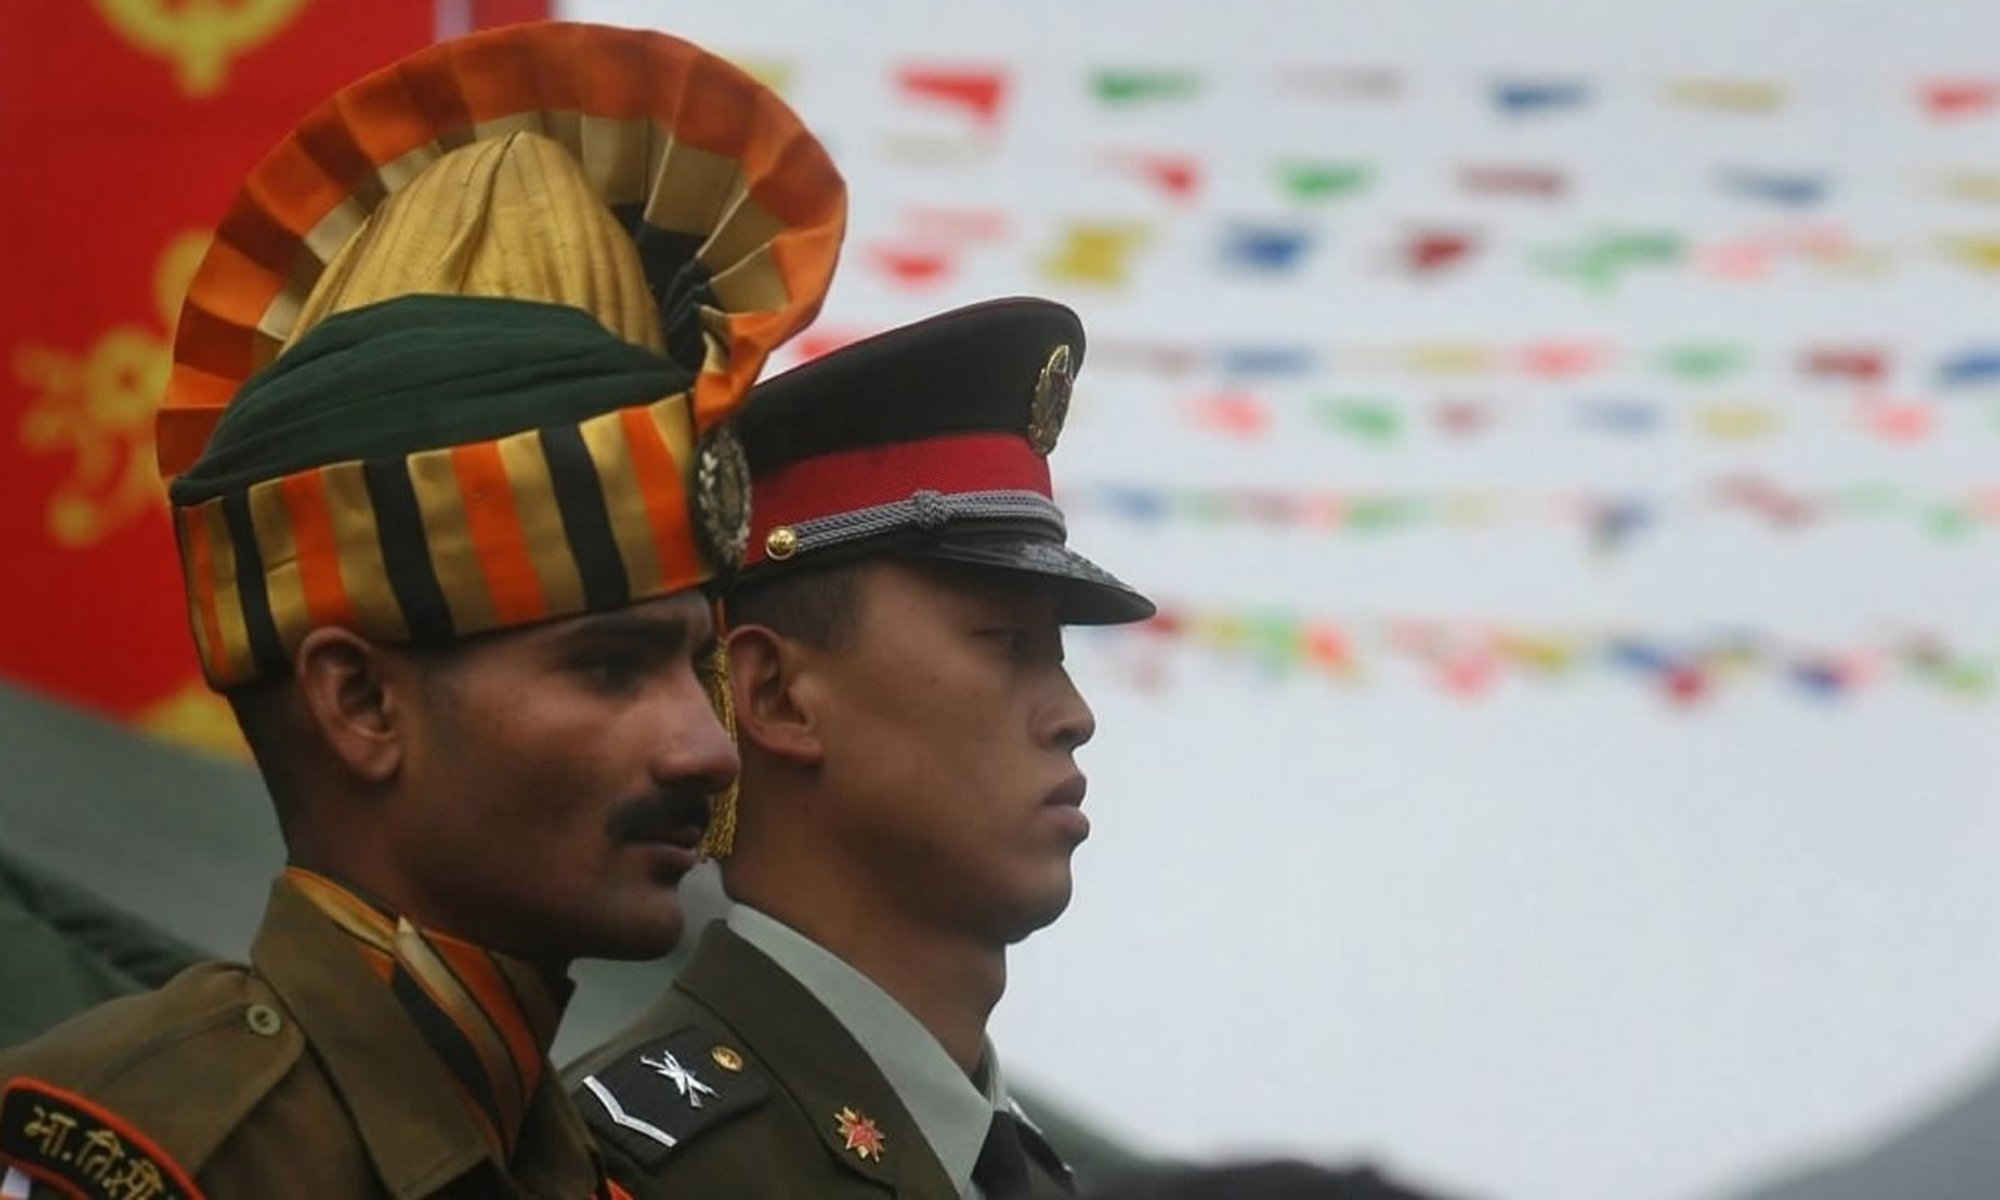 India has not yet returned the lost Chinese soldiers